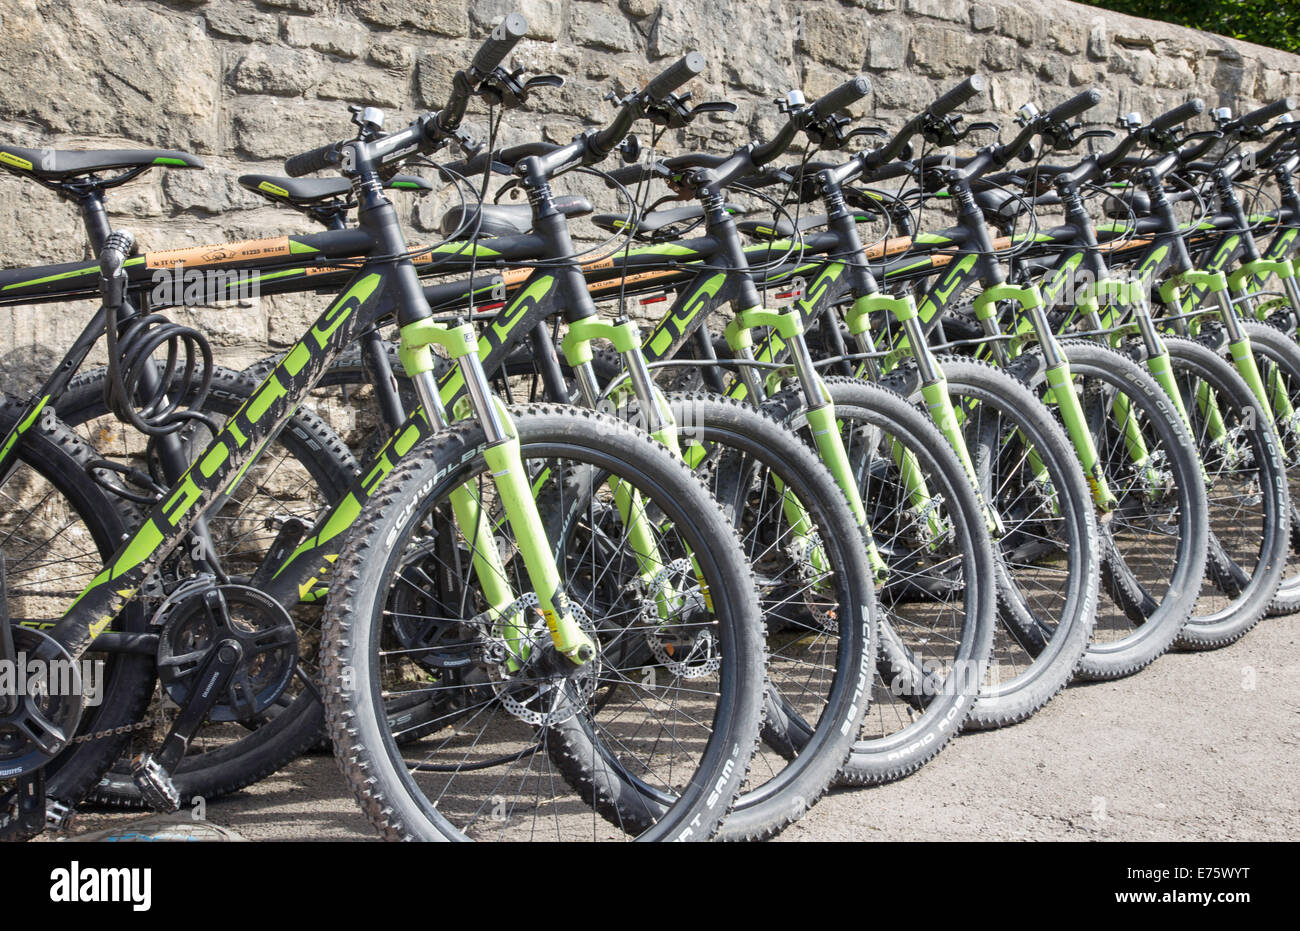 A row of Mountain Bikes for hire, England, UK Stock Photo